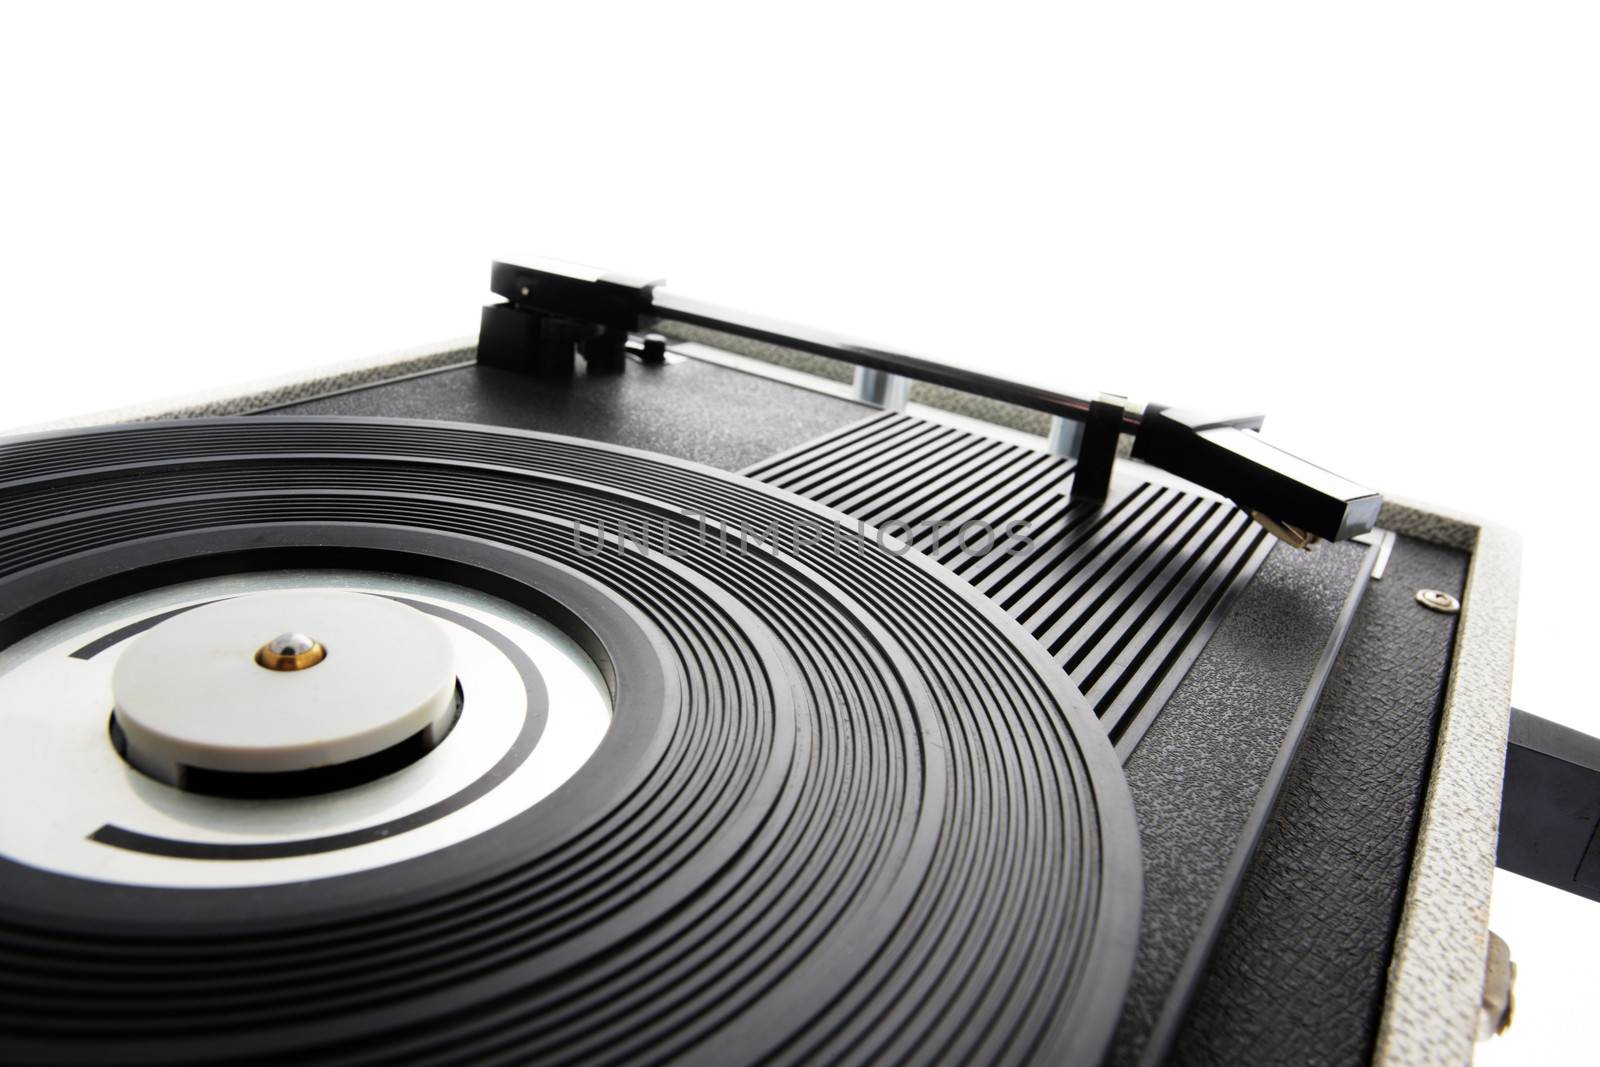 Old record player by stokkete